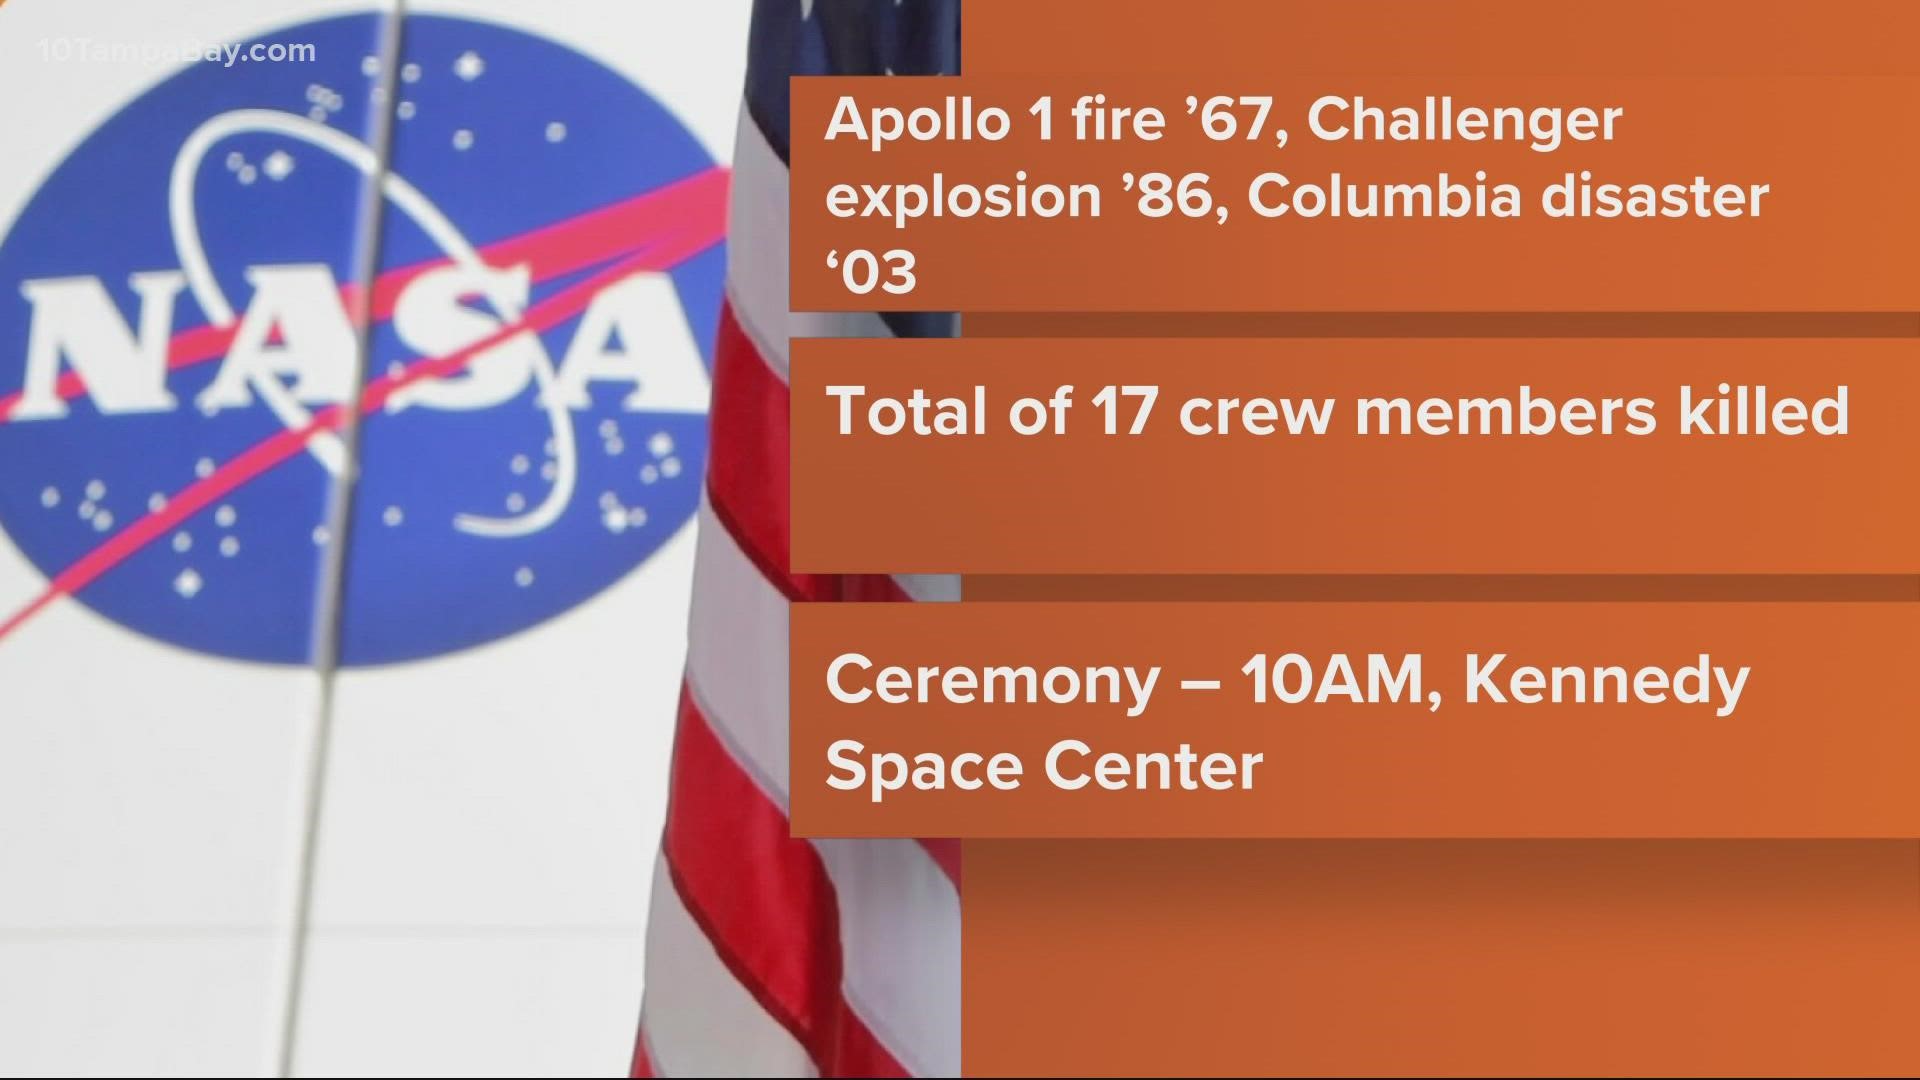 The tribute to the lives lost in the pursuit of space will be held at 10 a.m. on Jan. 27.